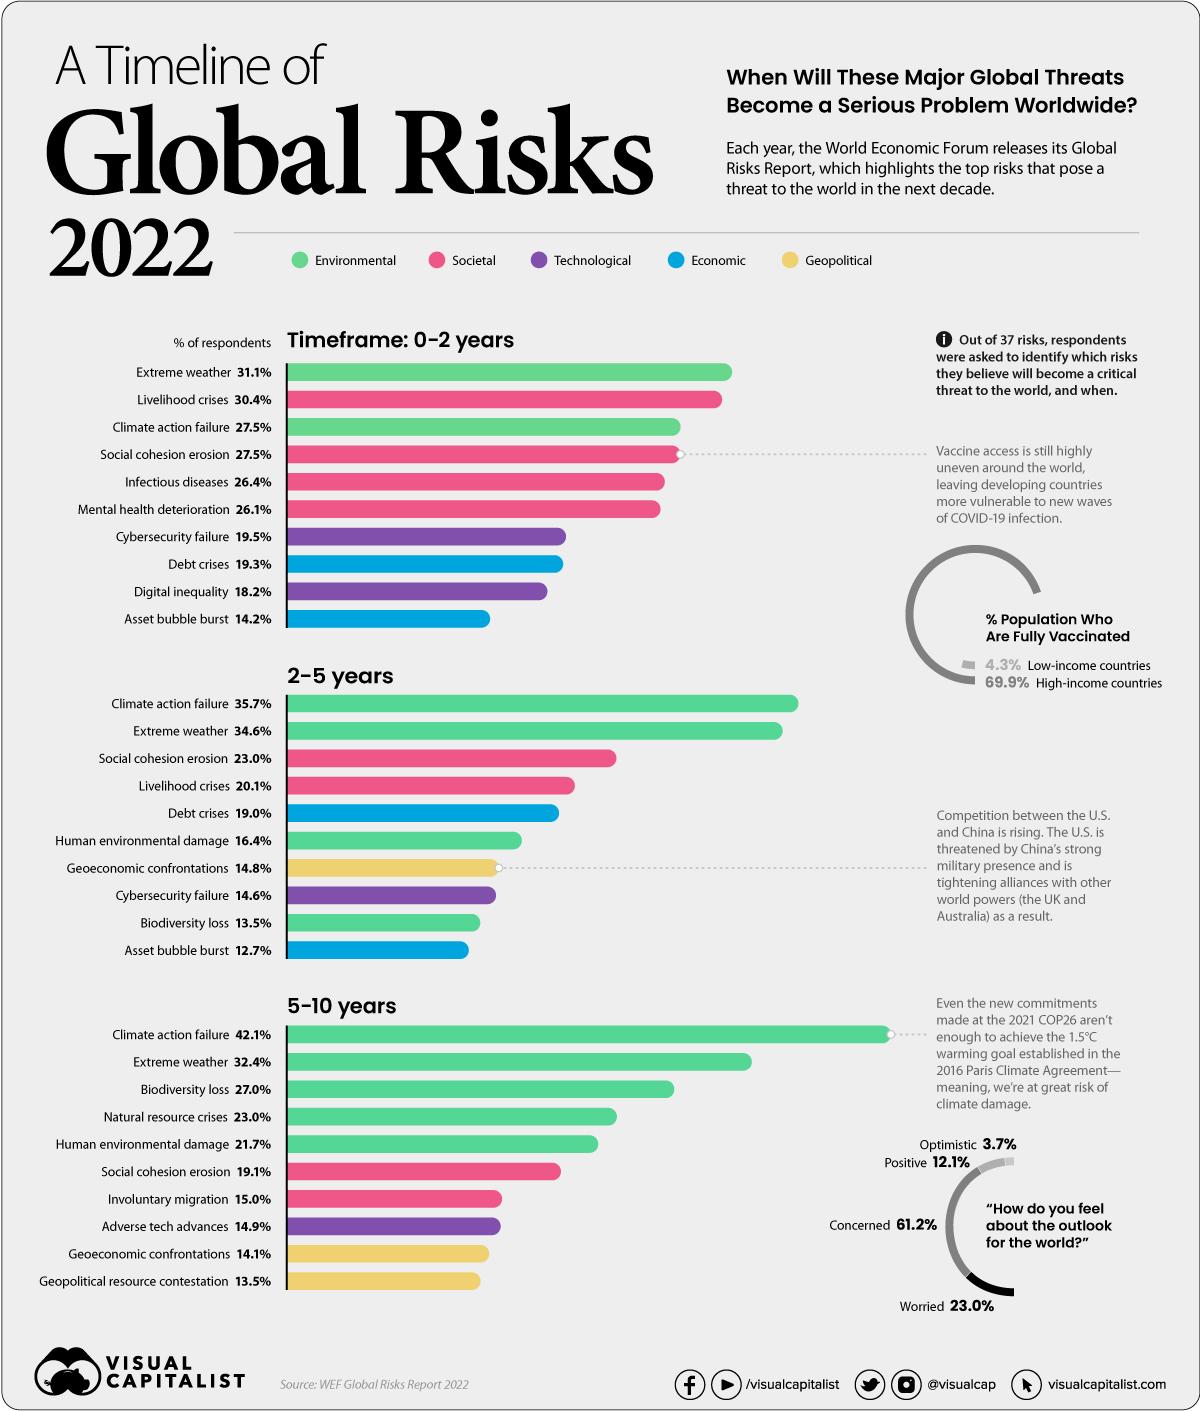 Which Global Risks Are Posing Imminent Threats?